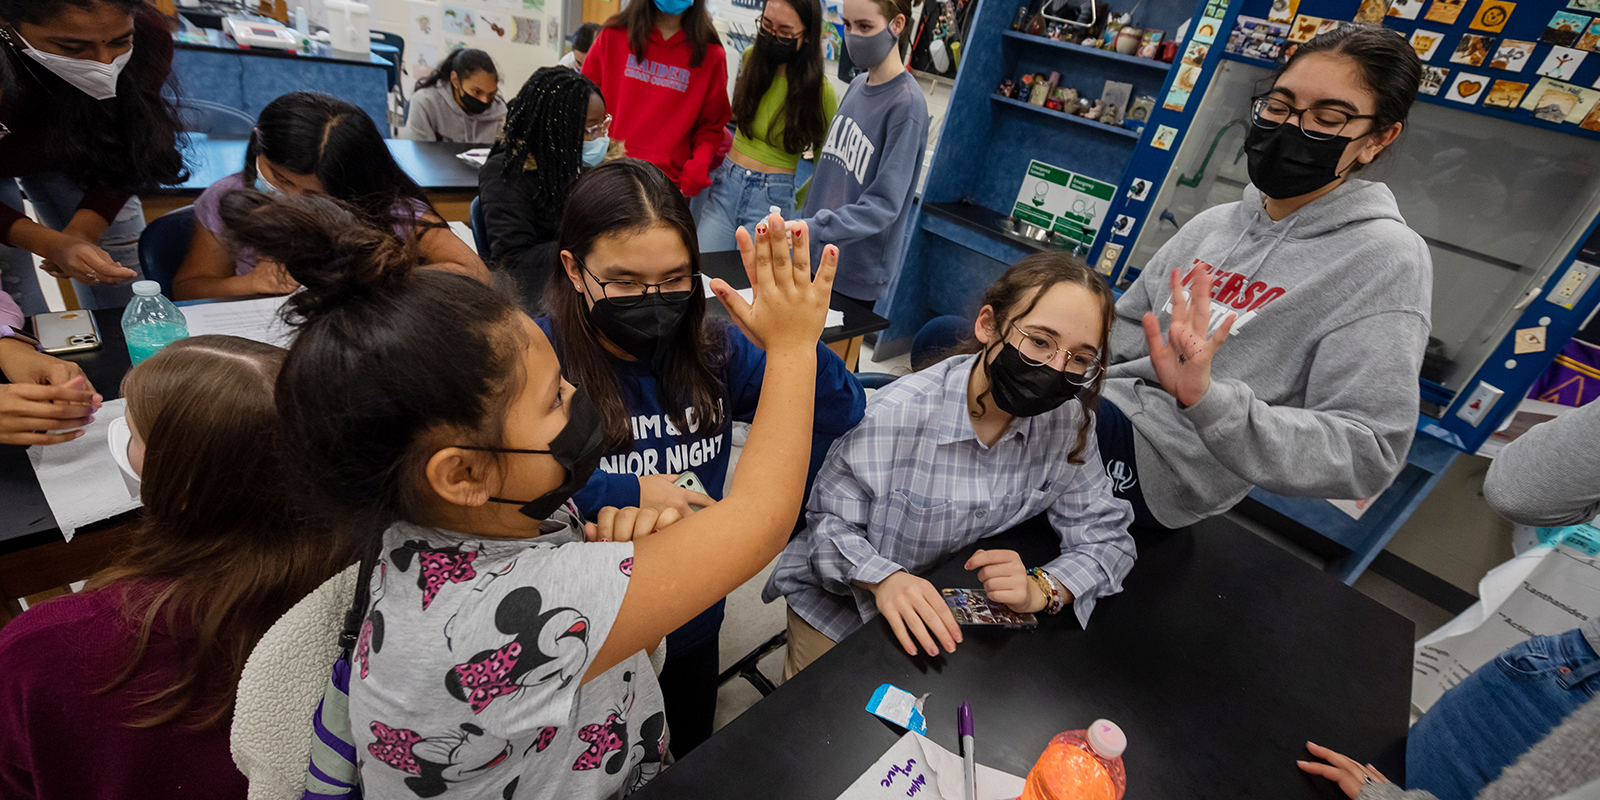 A TJHSST student high-fives a Weyanoke ES student she mentors as part of the Women Interested in Science and Engineering Club.